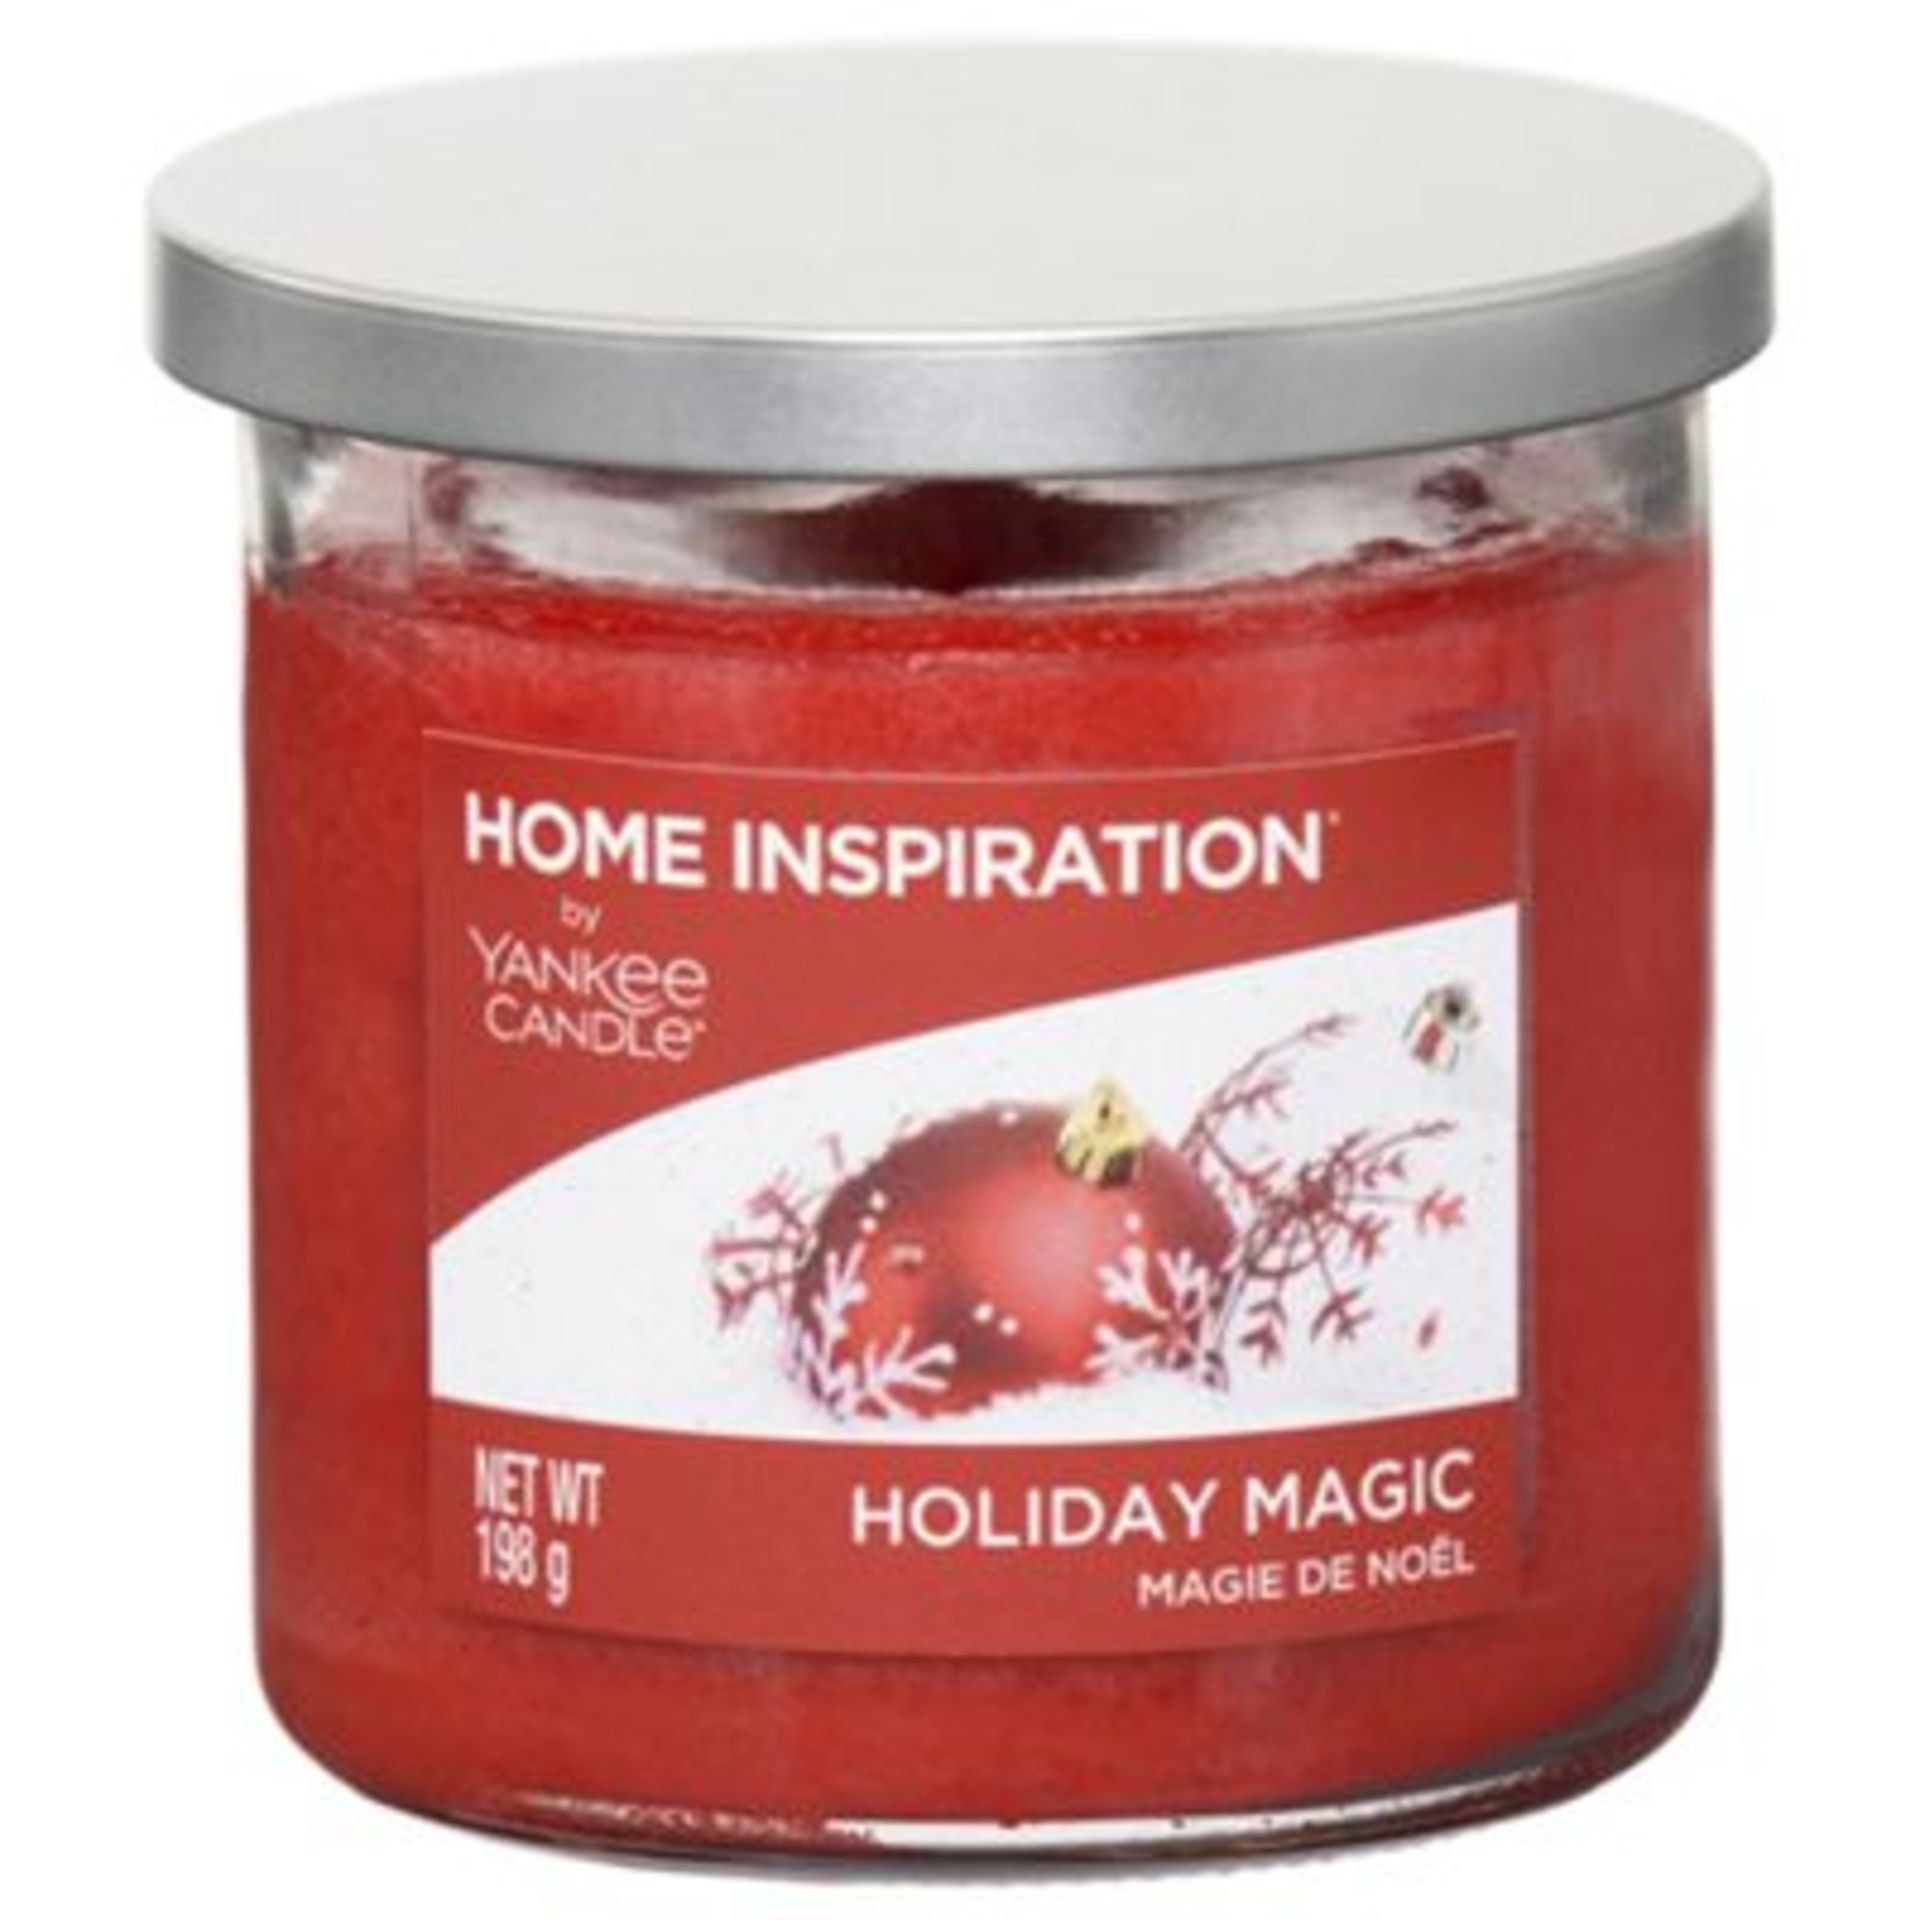 V *TRADE QTY* Brand New Home Inspiration by Yankee Candle Holiday Magic 198g Tumbler Candle - ISP £